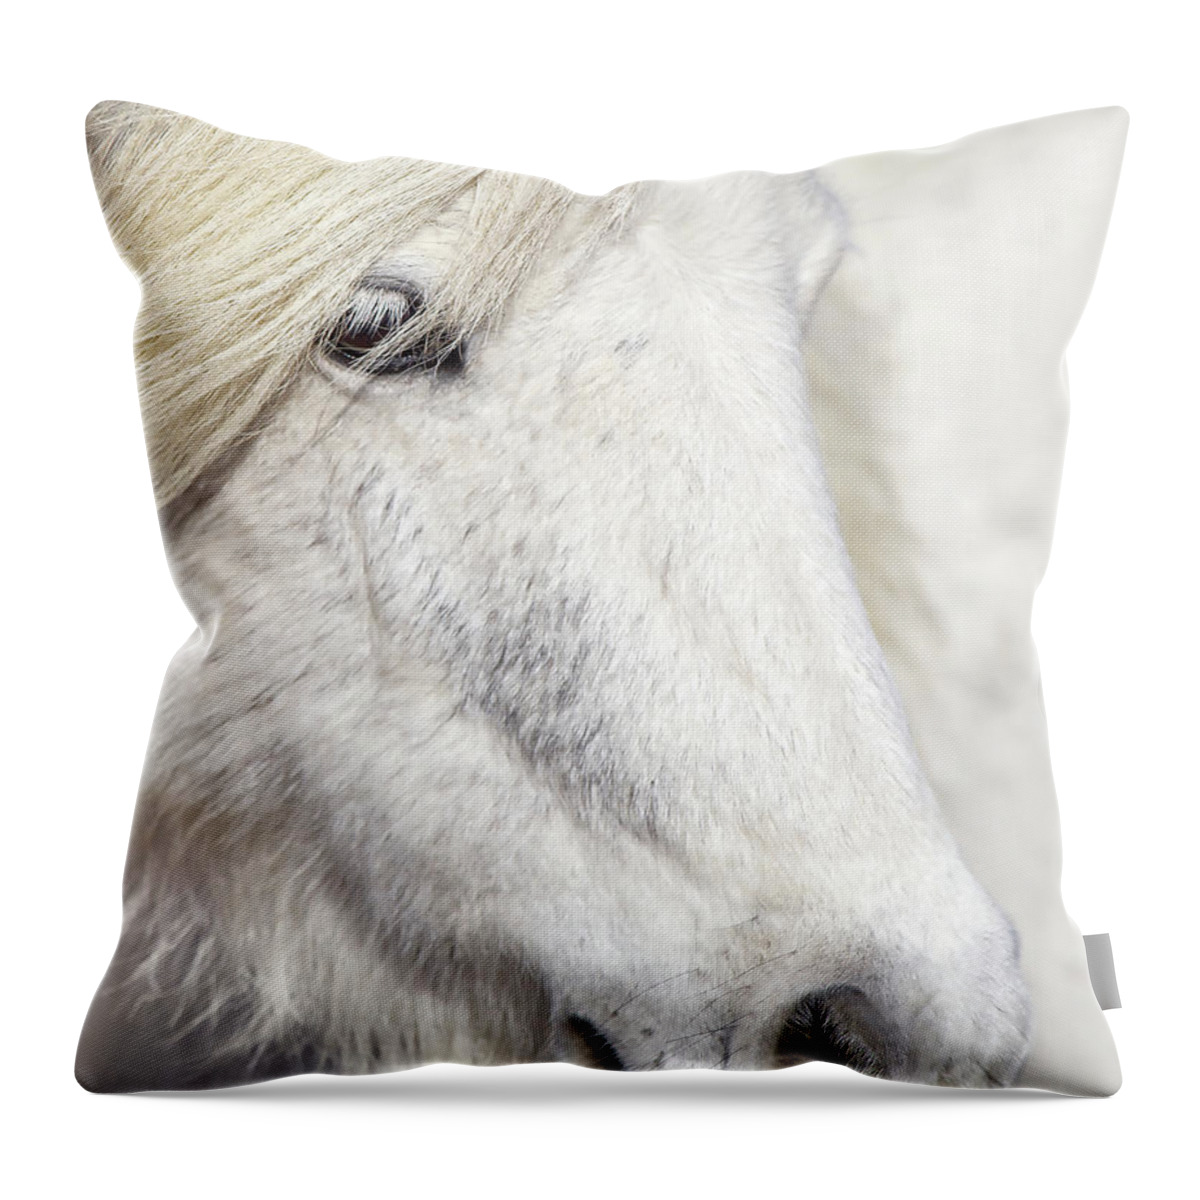 Majestic Throw Pillow featuring the photograph Majestic by Amanda Smith